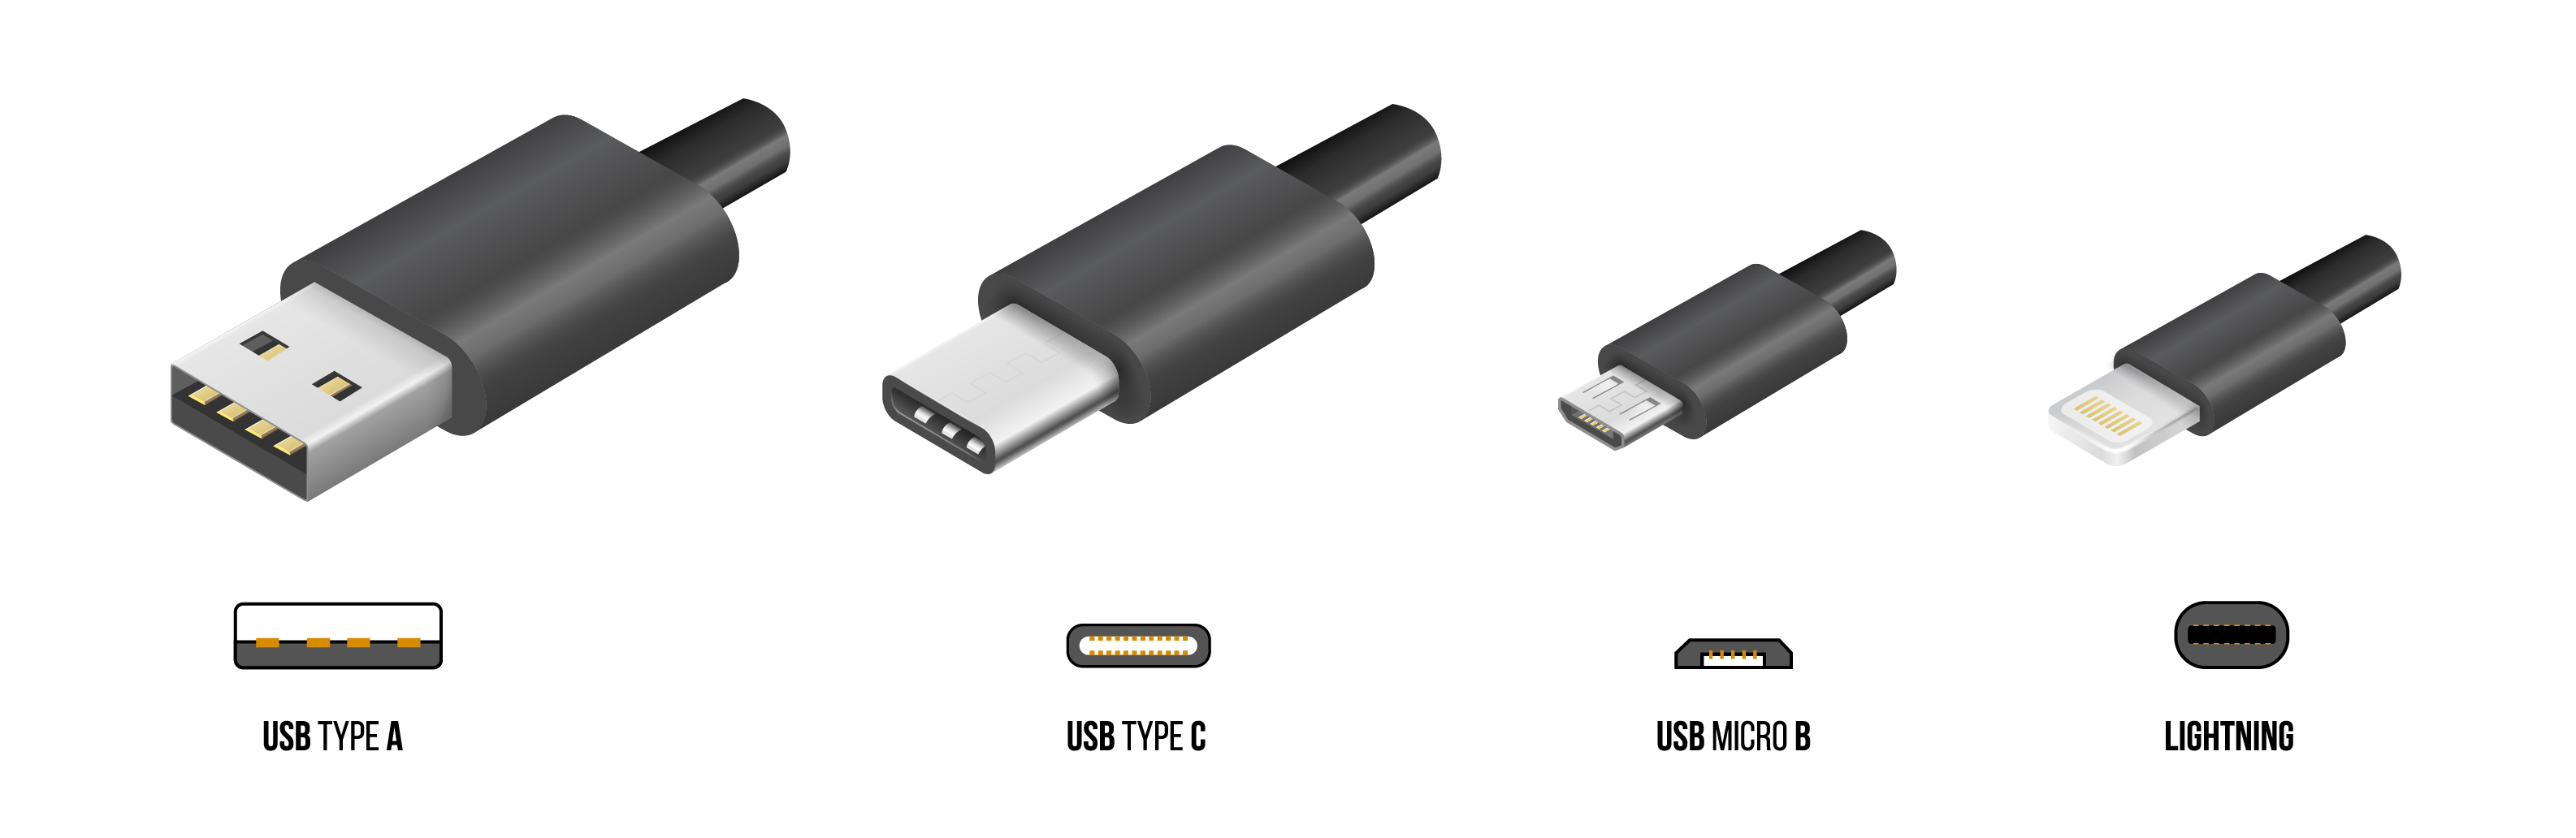 various USB connectors - USB type A, USB type C, Micro USB, and lightning